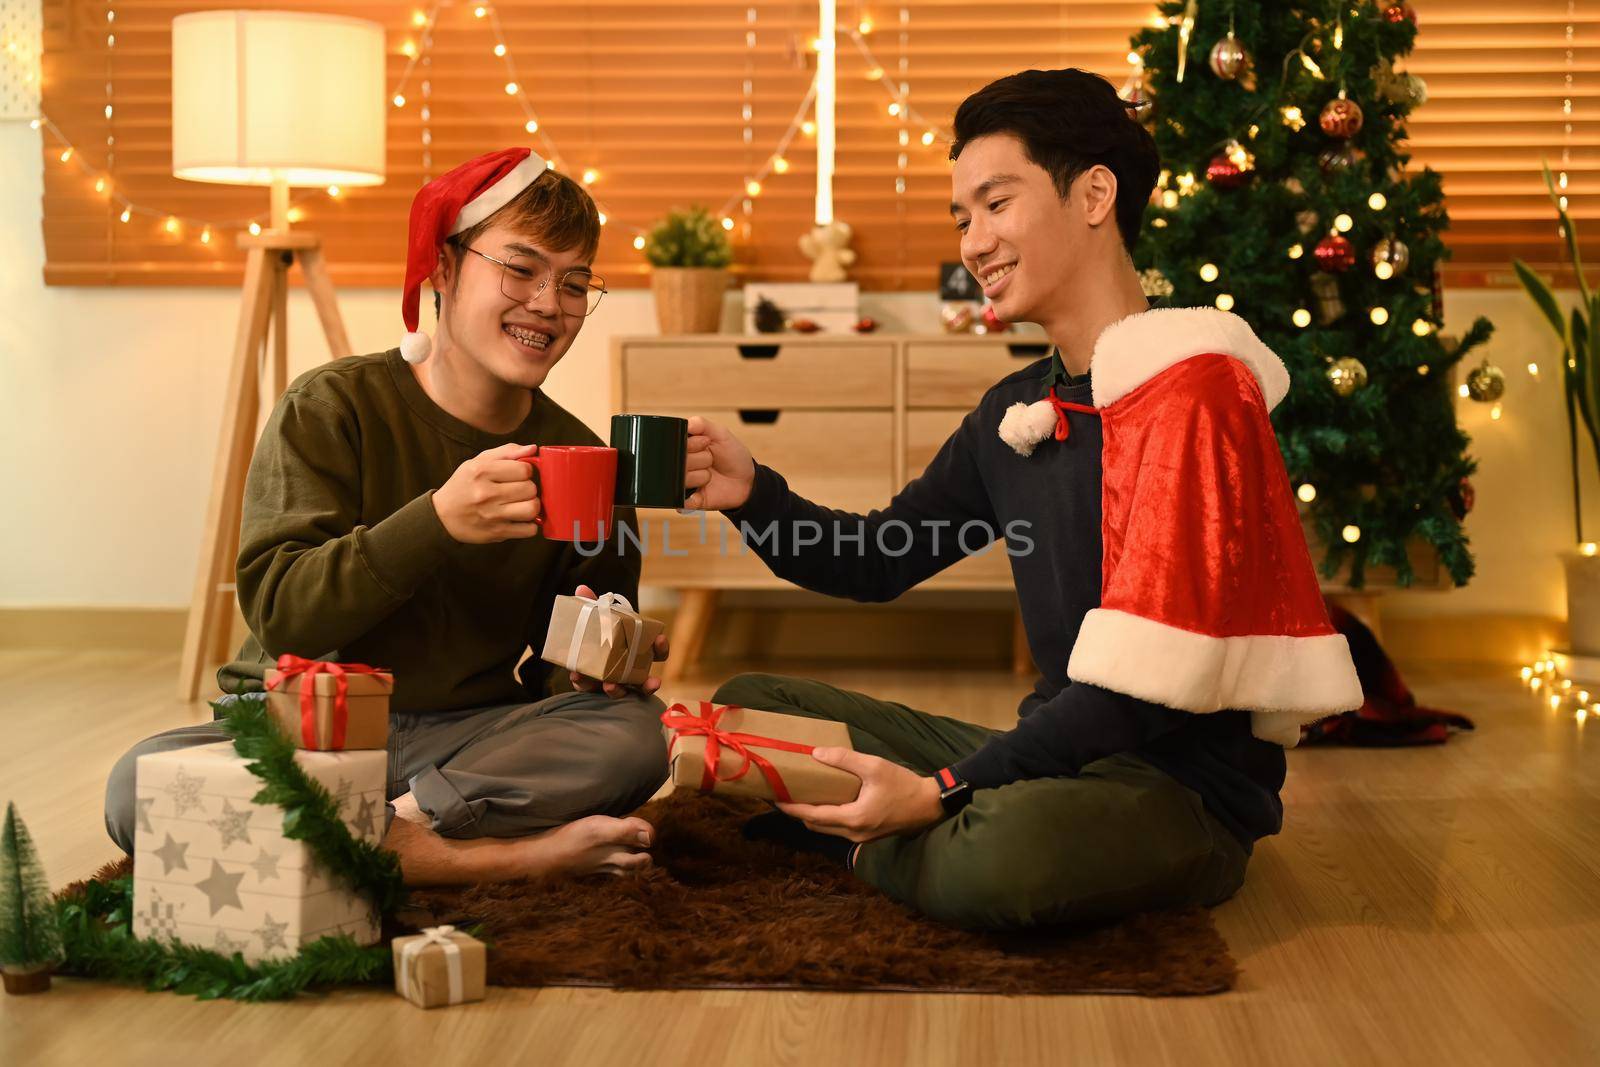 Two happy man next to a decorated Christmas tree and enjoying drinking hot chocolate together.